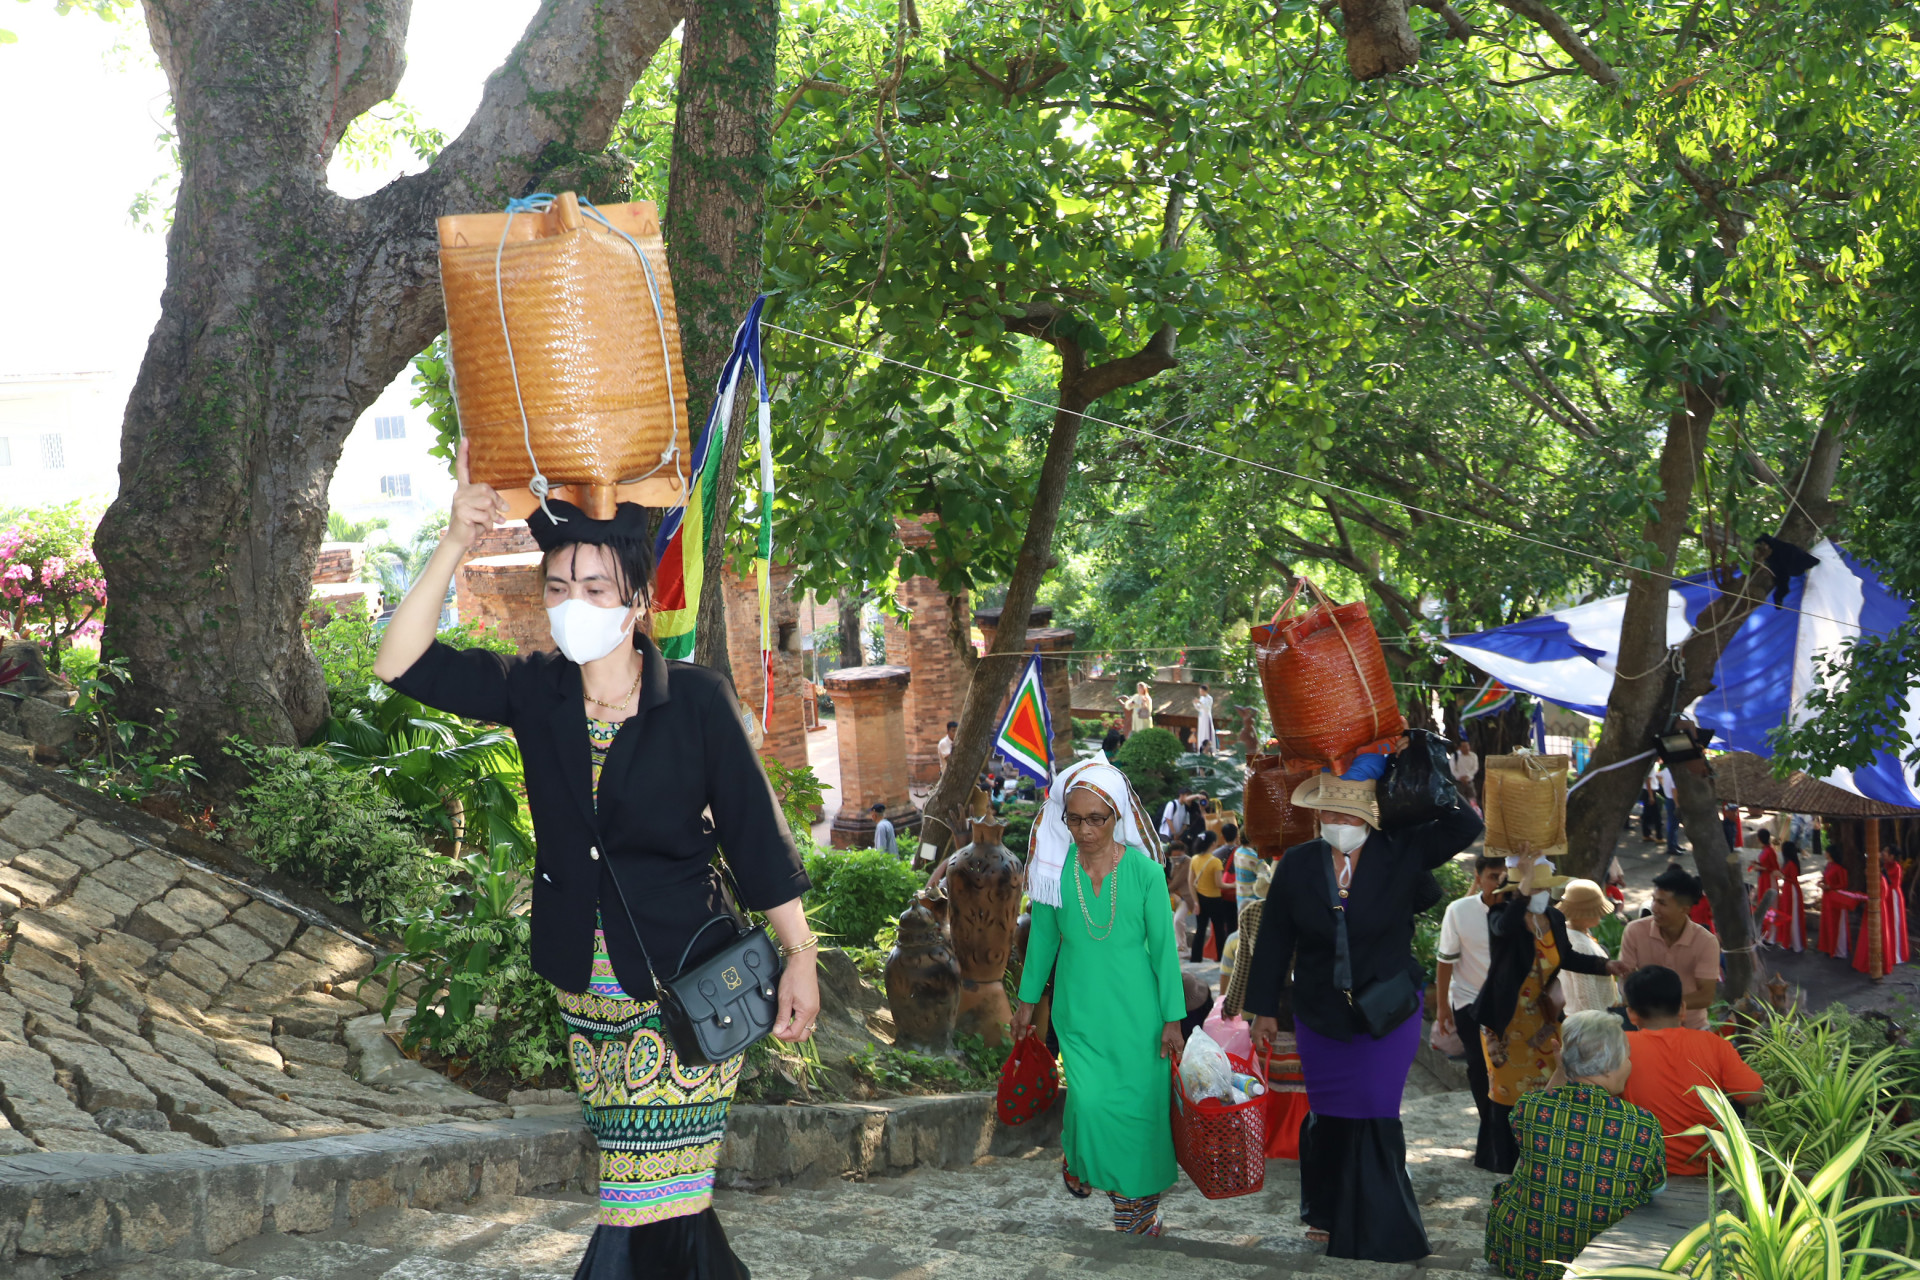 Cham people bringing offerings to offer to the land’s mother Po Inu Nagar

